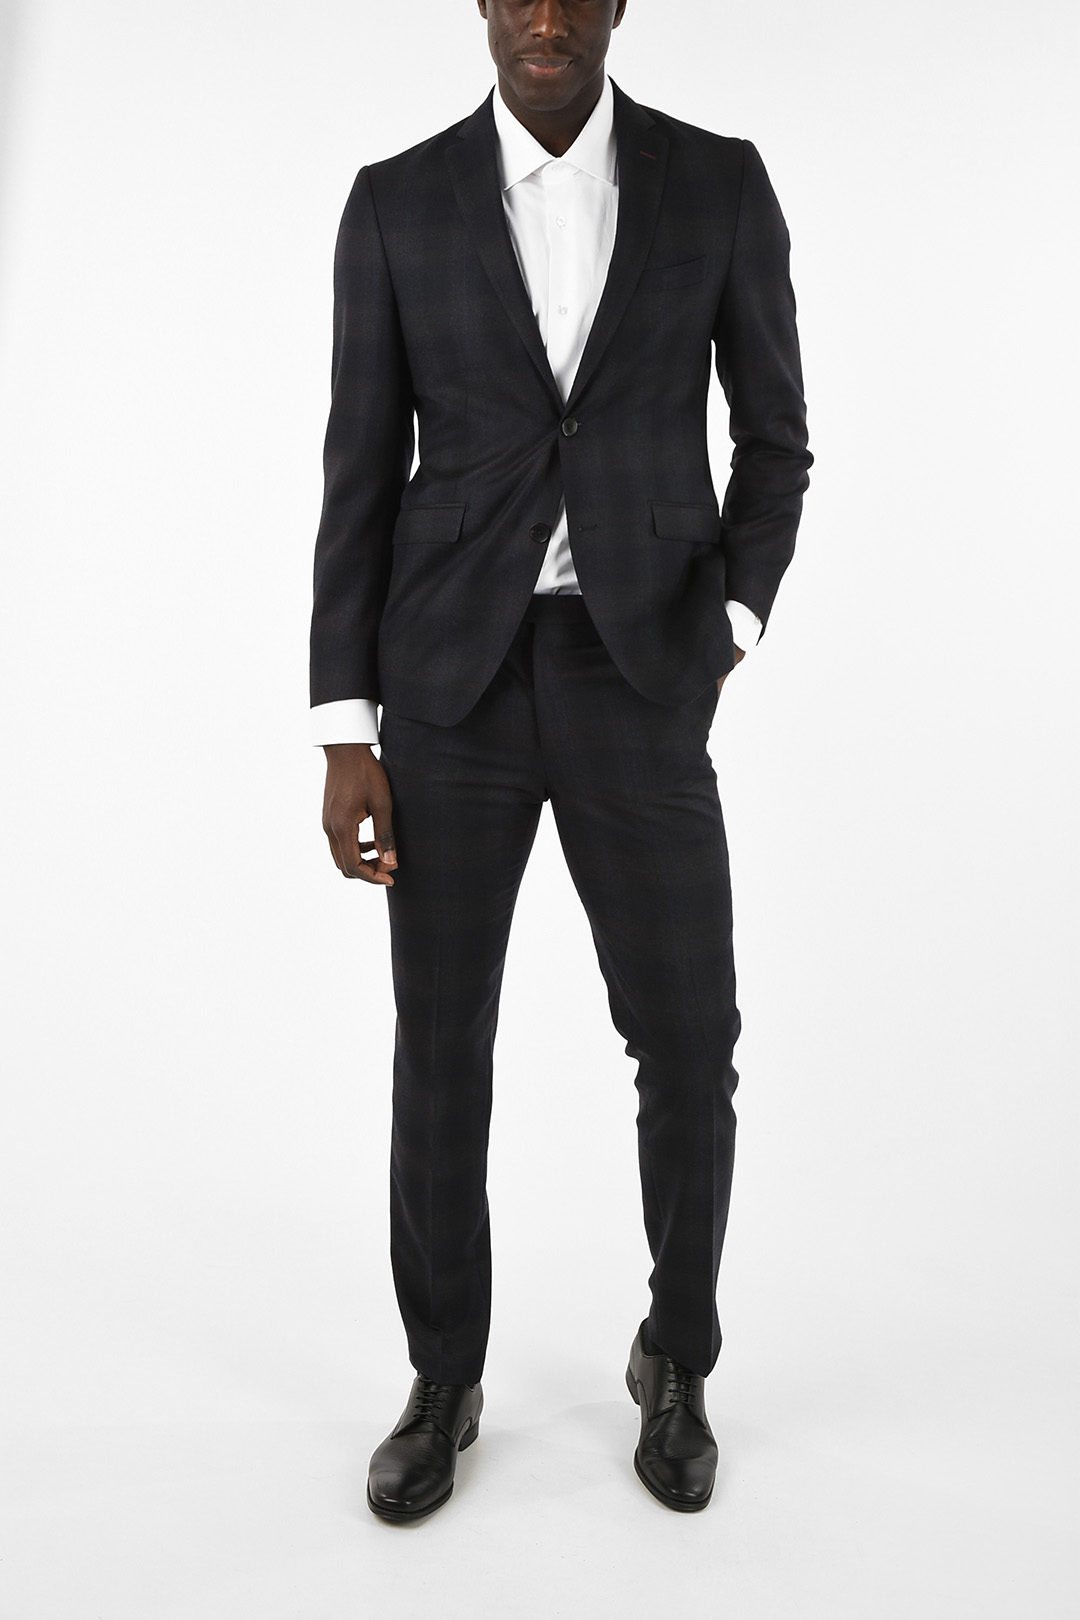 Etro Wool Two Button Suit With Flap PocketS men - Glamood Outlet